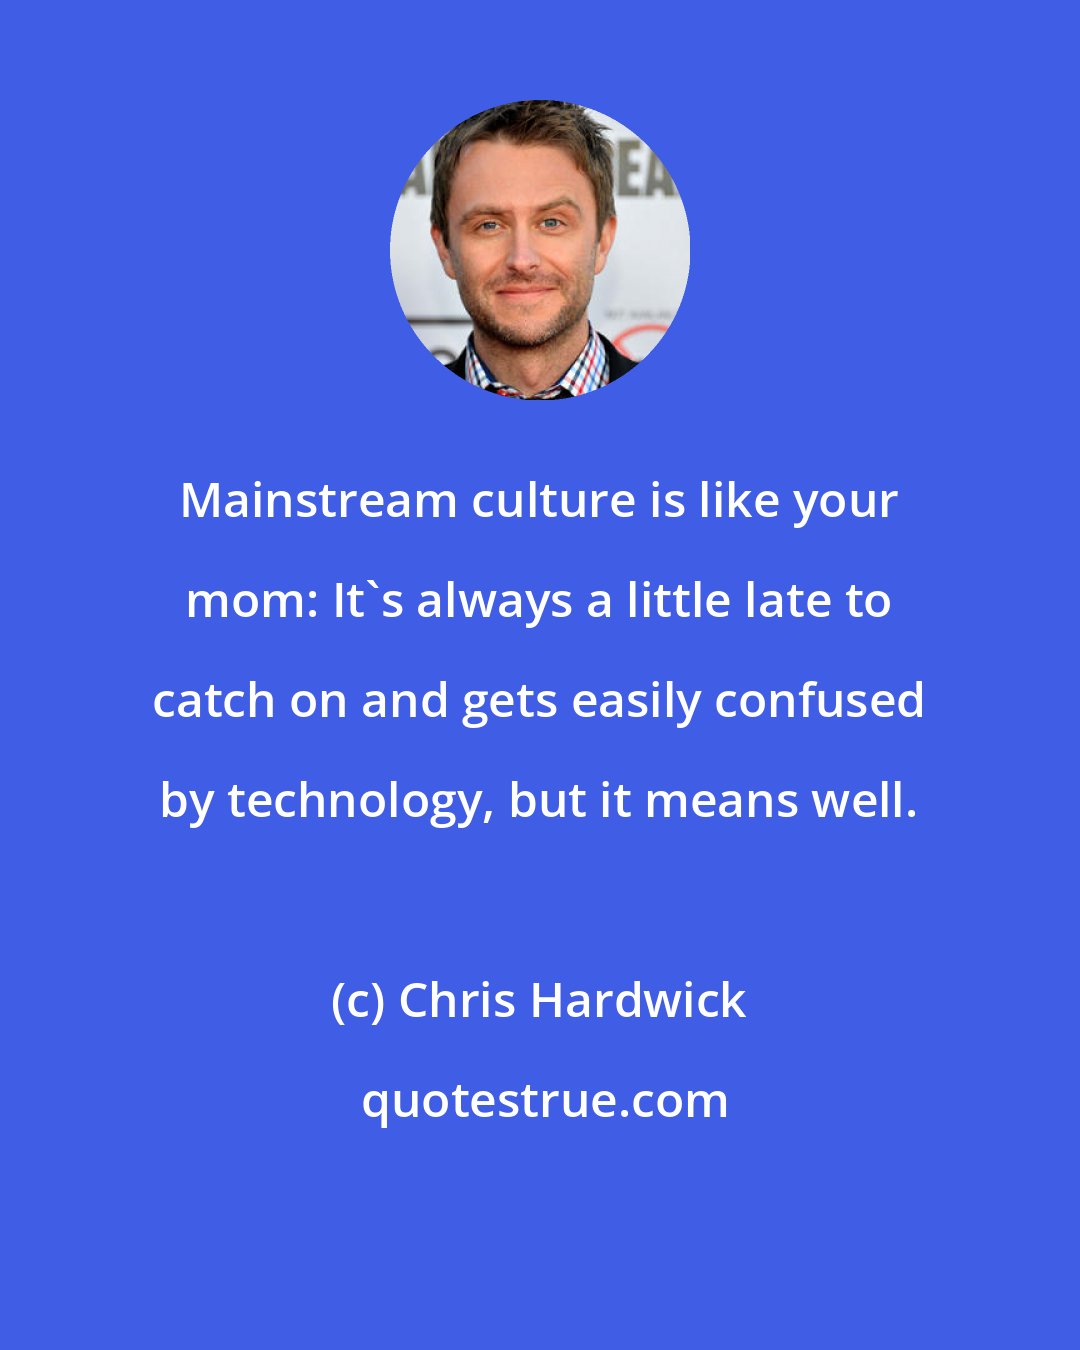 Chris Hardwick: Mainstream culture is like your mom: It's always a little late to catch on and gets easily confused by technology, but it means well.